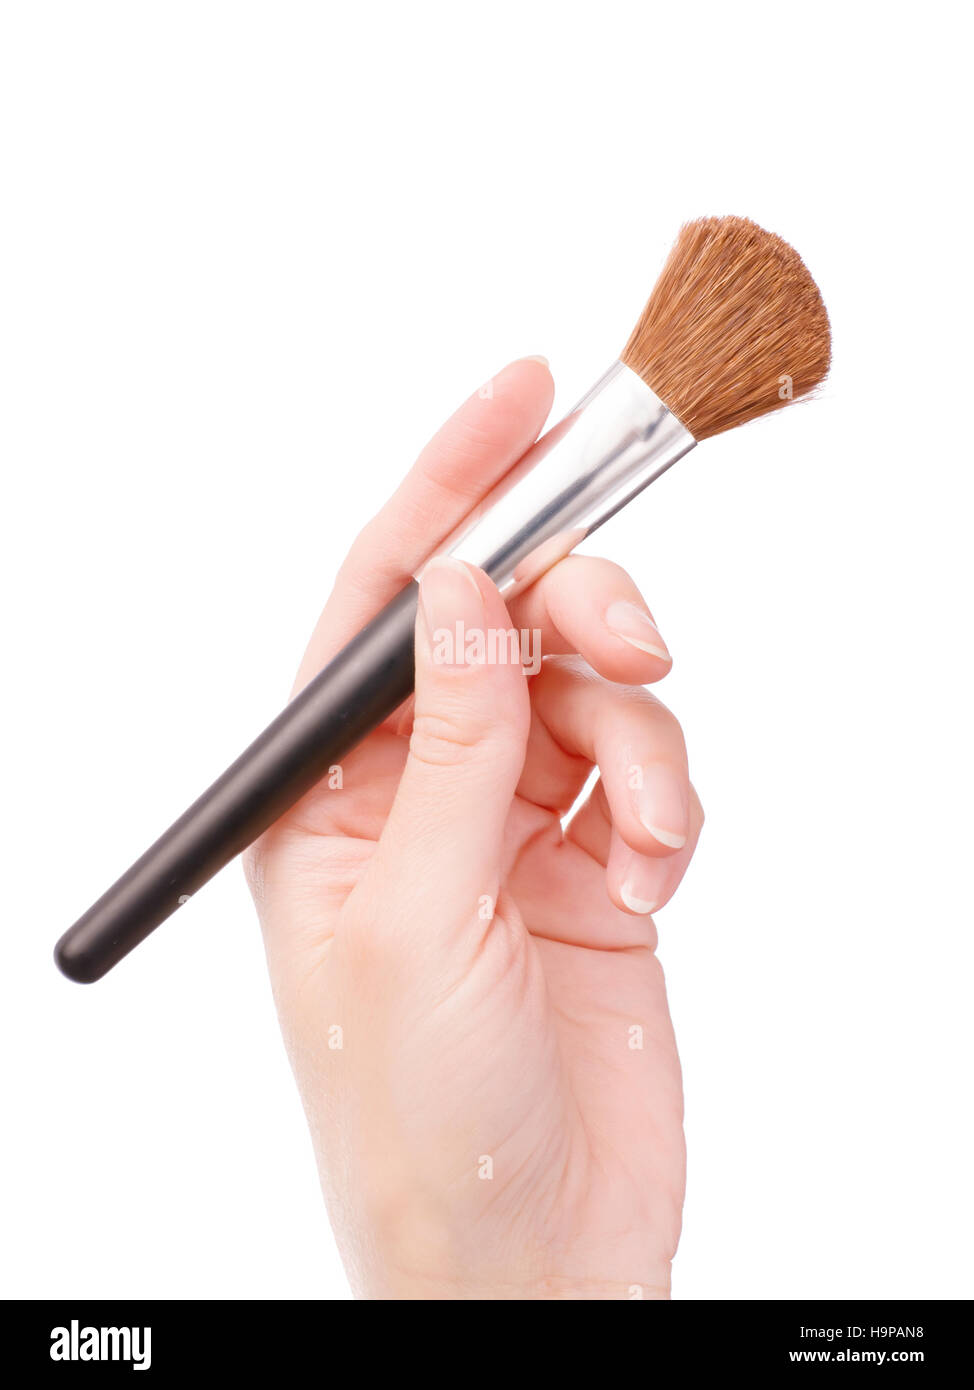 https://c8.alamy.com/comp/H9PAN8/woman-hand-holding-cosmetic-brush-isolated-on-white-H9PAN8.jpg